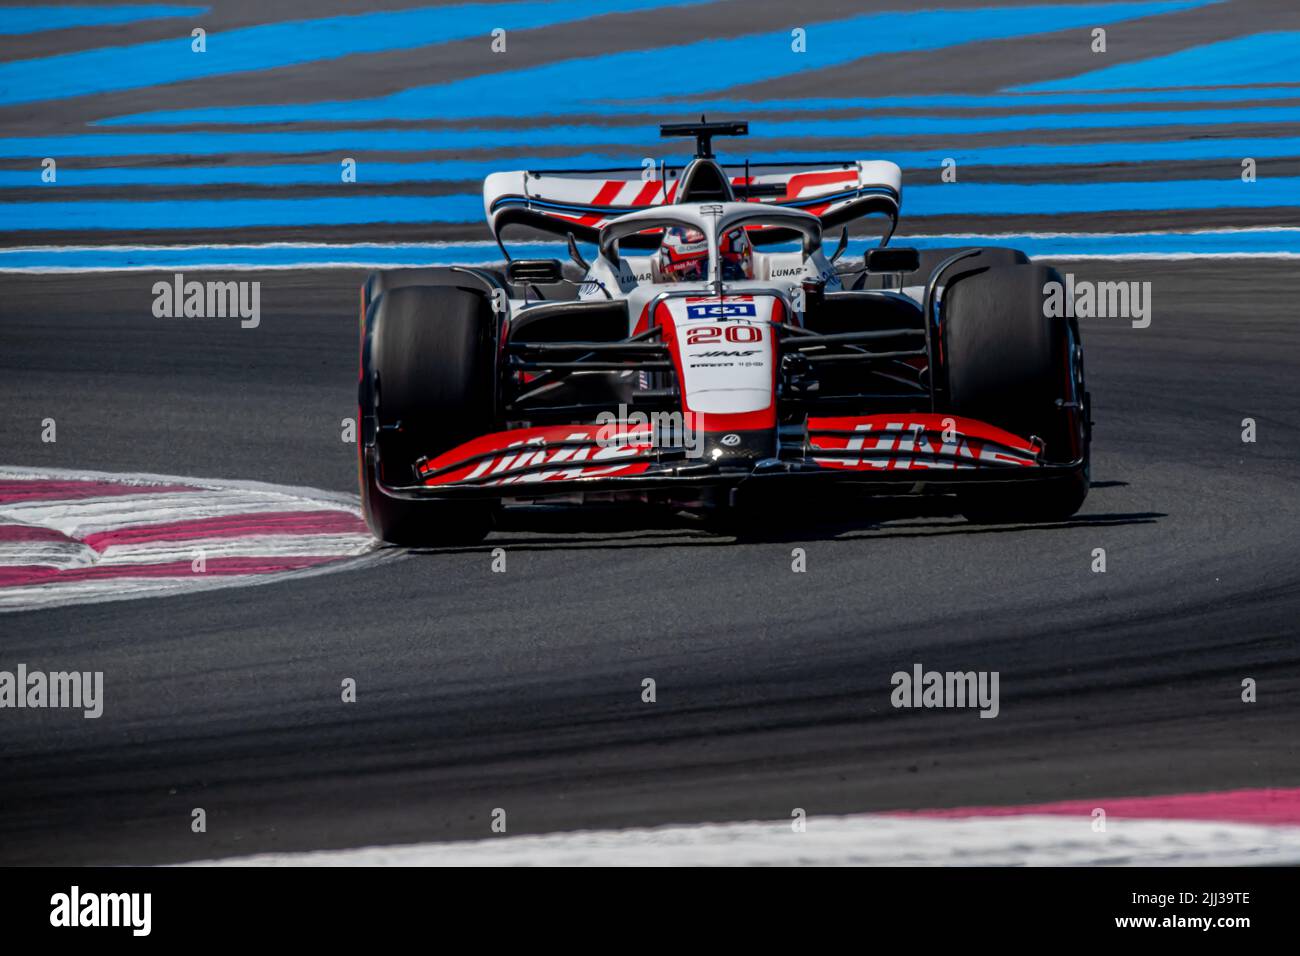 Le Castellet, France, 22nd Jul 2022, Kevin Magnussen, from Denmark competes for Haas F1 . Practice, round 12 of the 2022 Formula 1 championship. Credit: Michael Potts/Alamy Live News Stock Photo